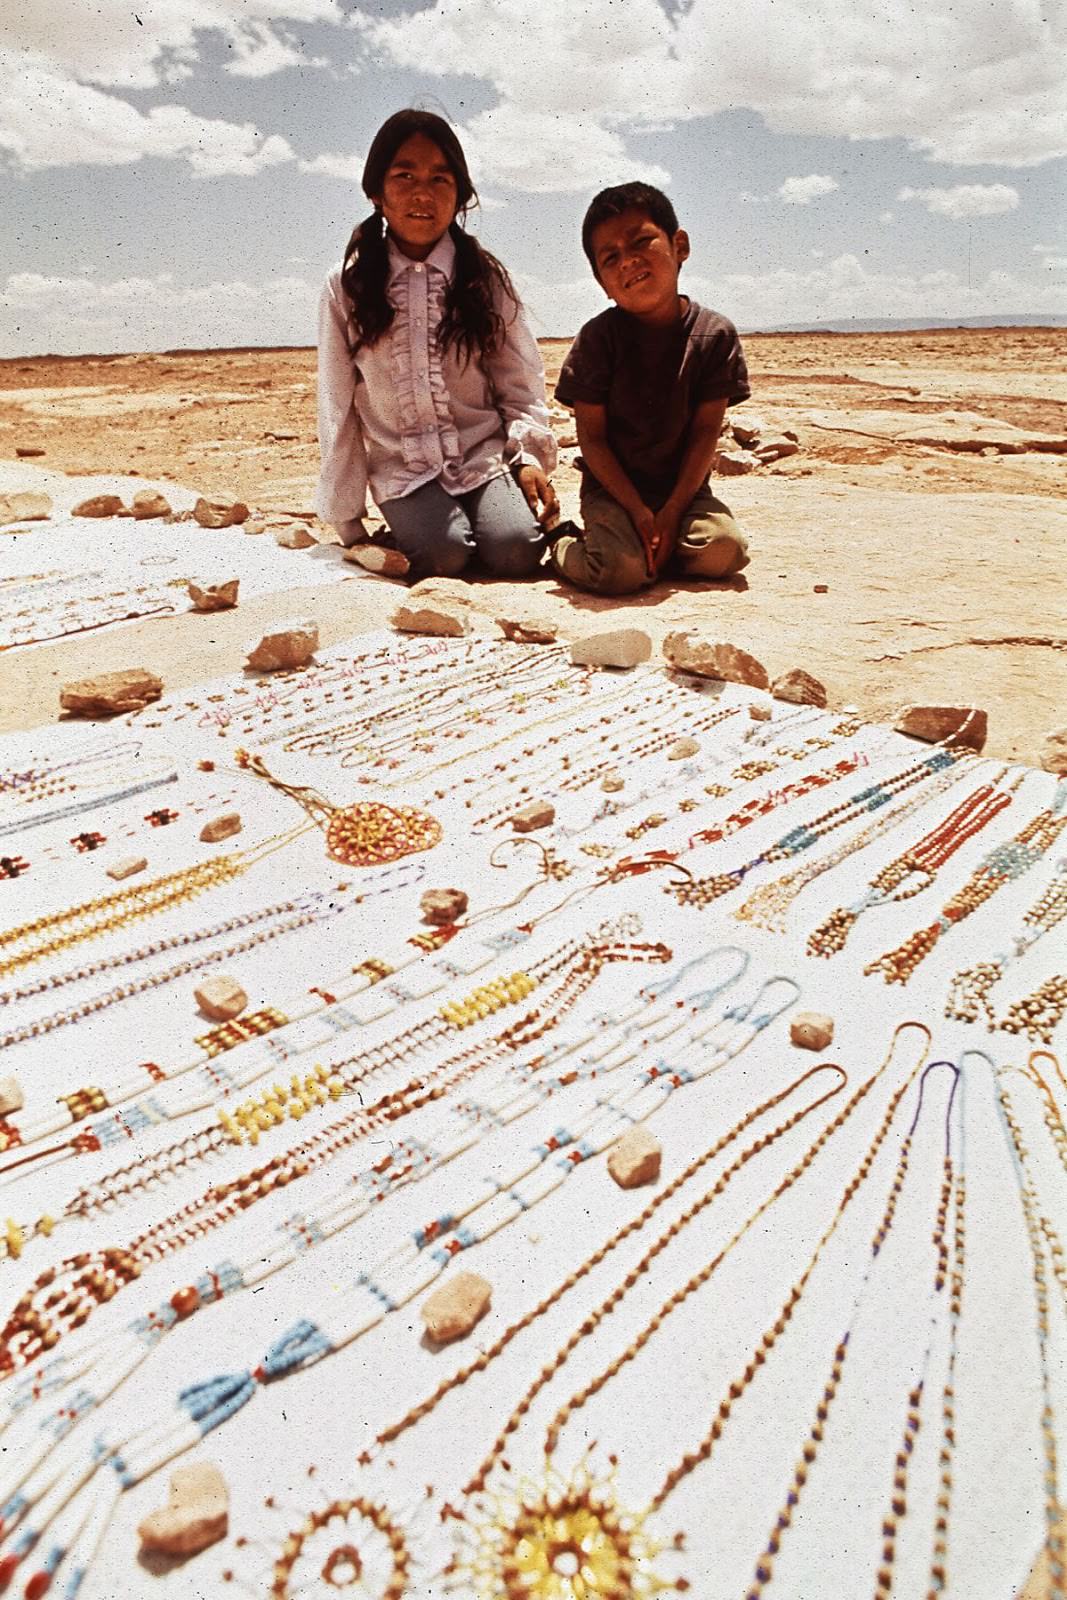 Children sell beads on the Navajo Reservation in Arizona.